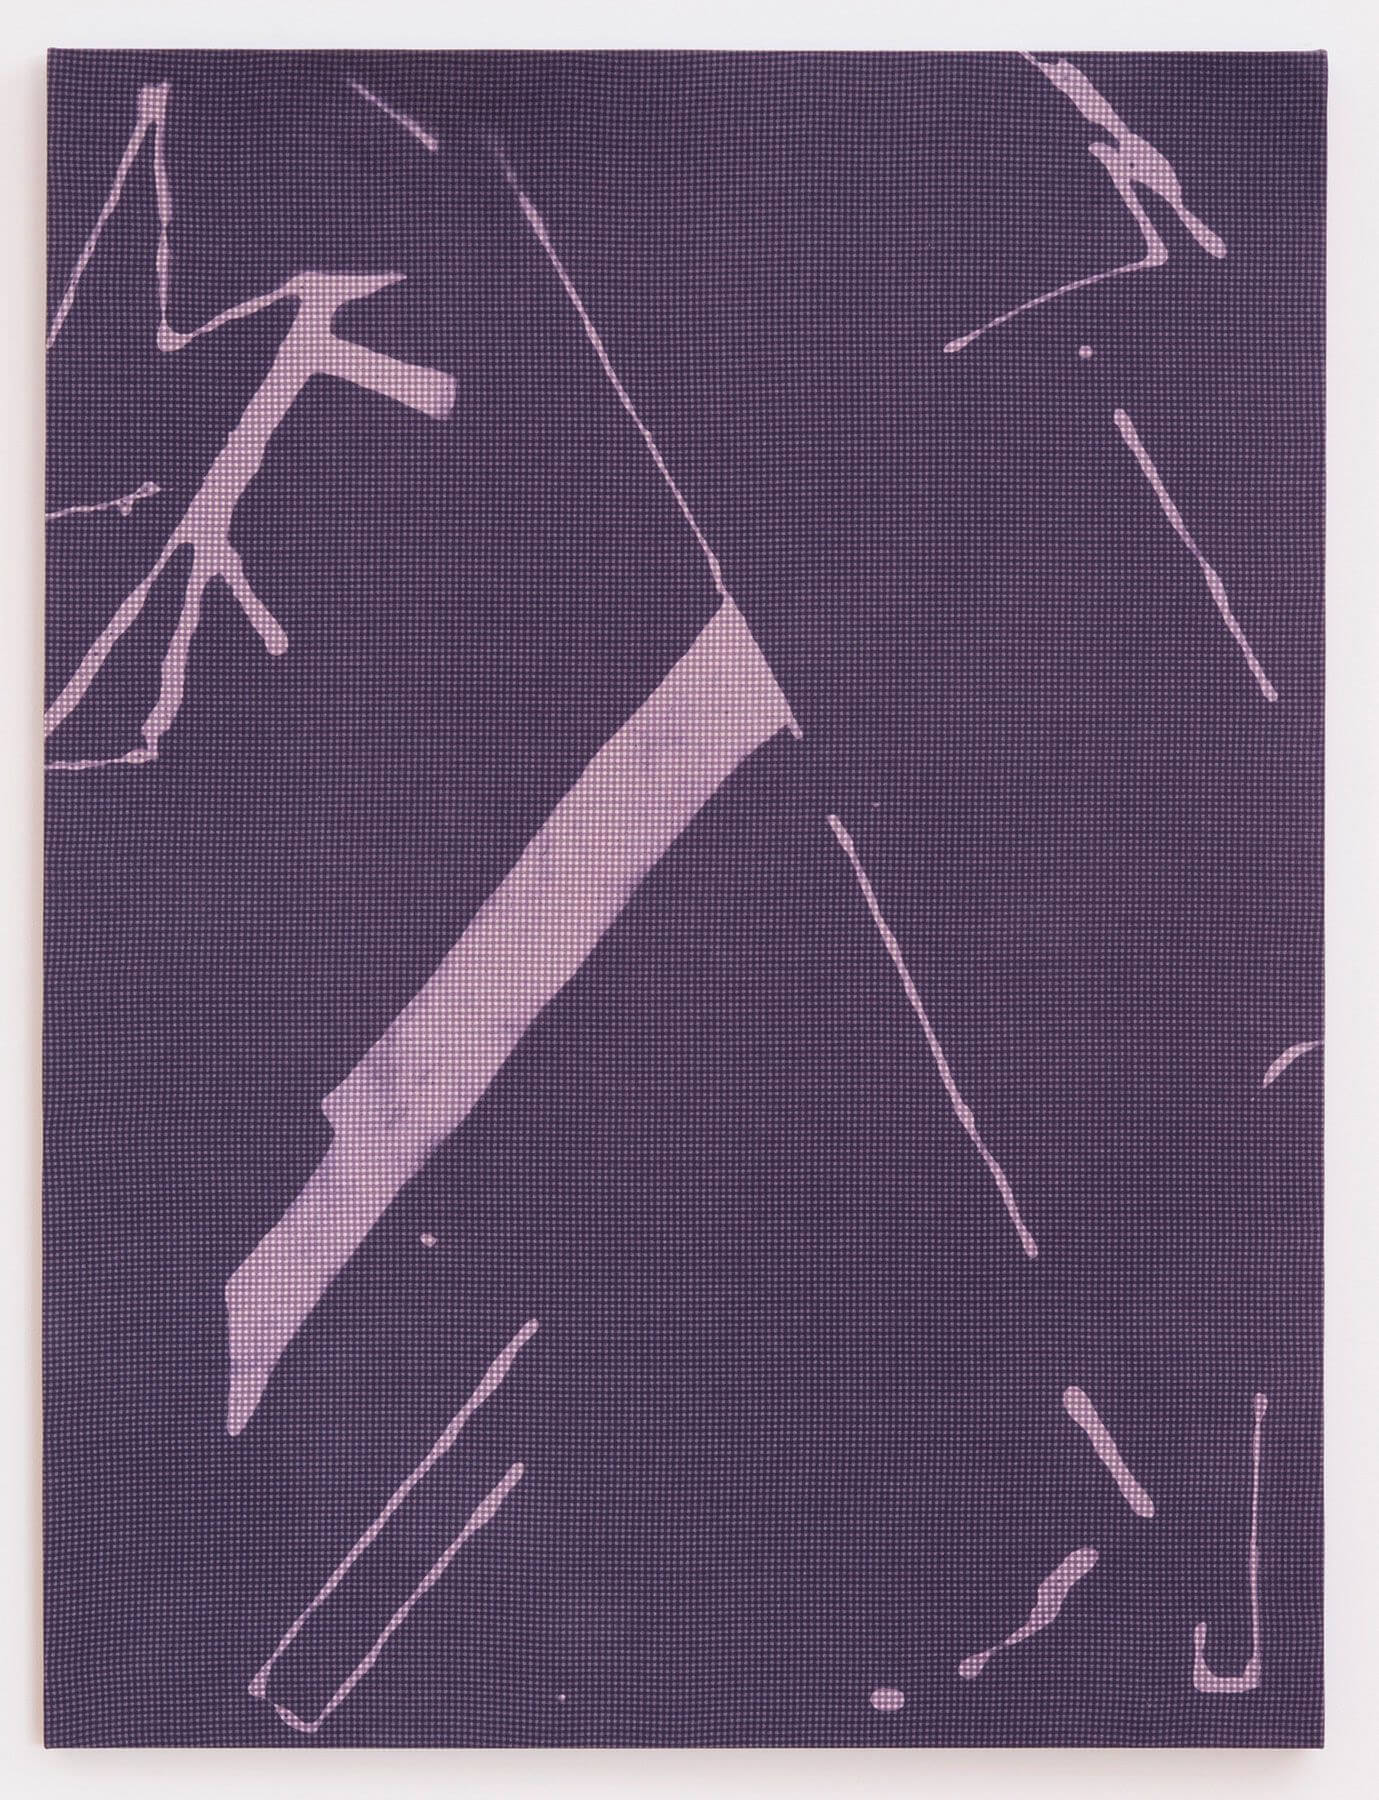 Cheryl Donegan
                                        'Untitled Resist (faded navy and pink)', 2014
                                        48 x 36 Inches
                                        dyed cotton
                                        